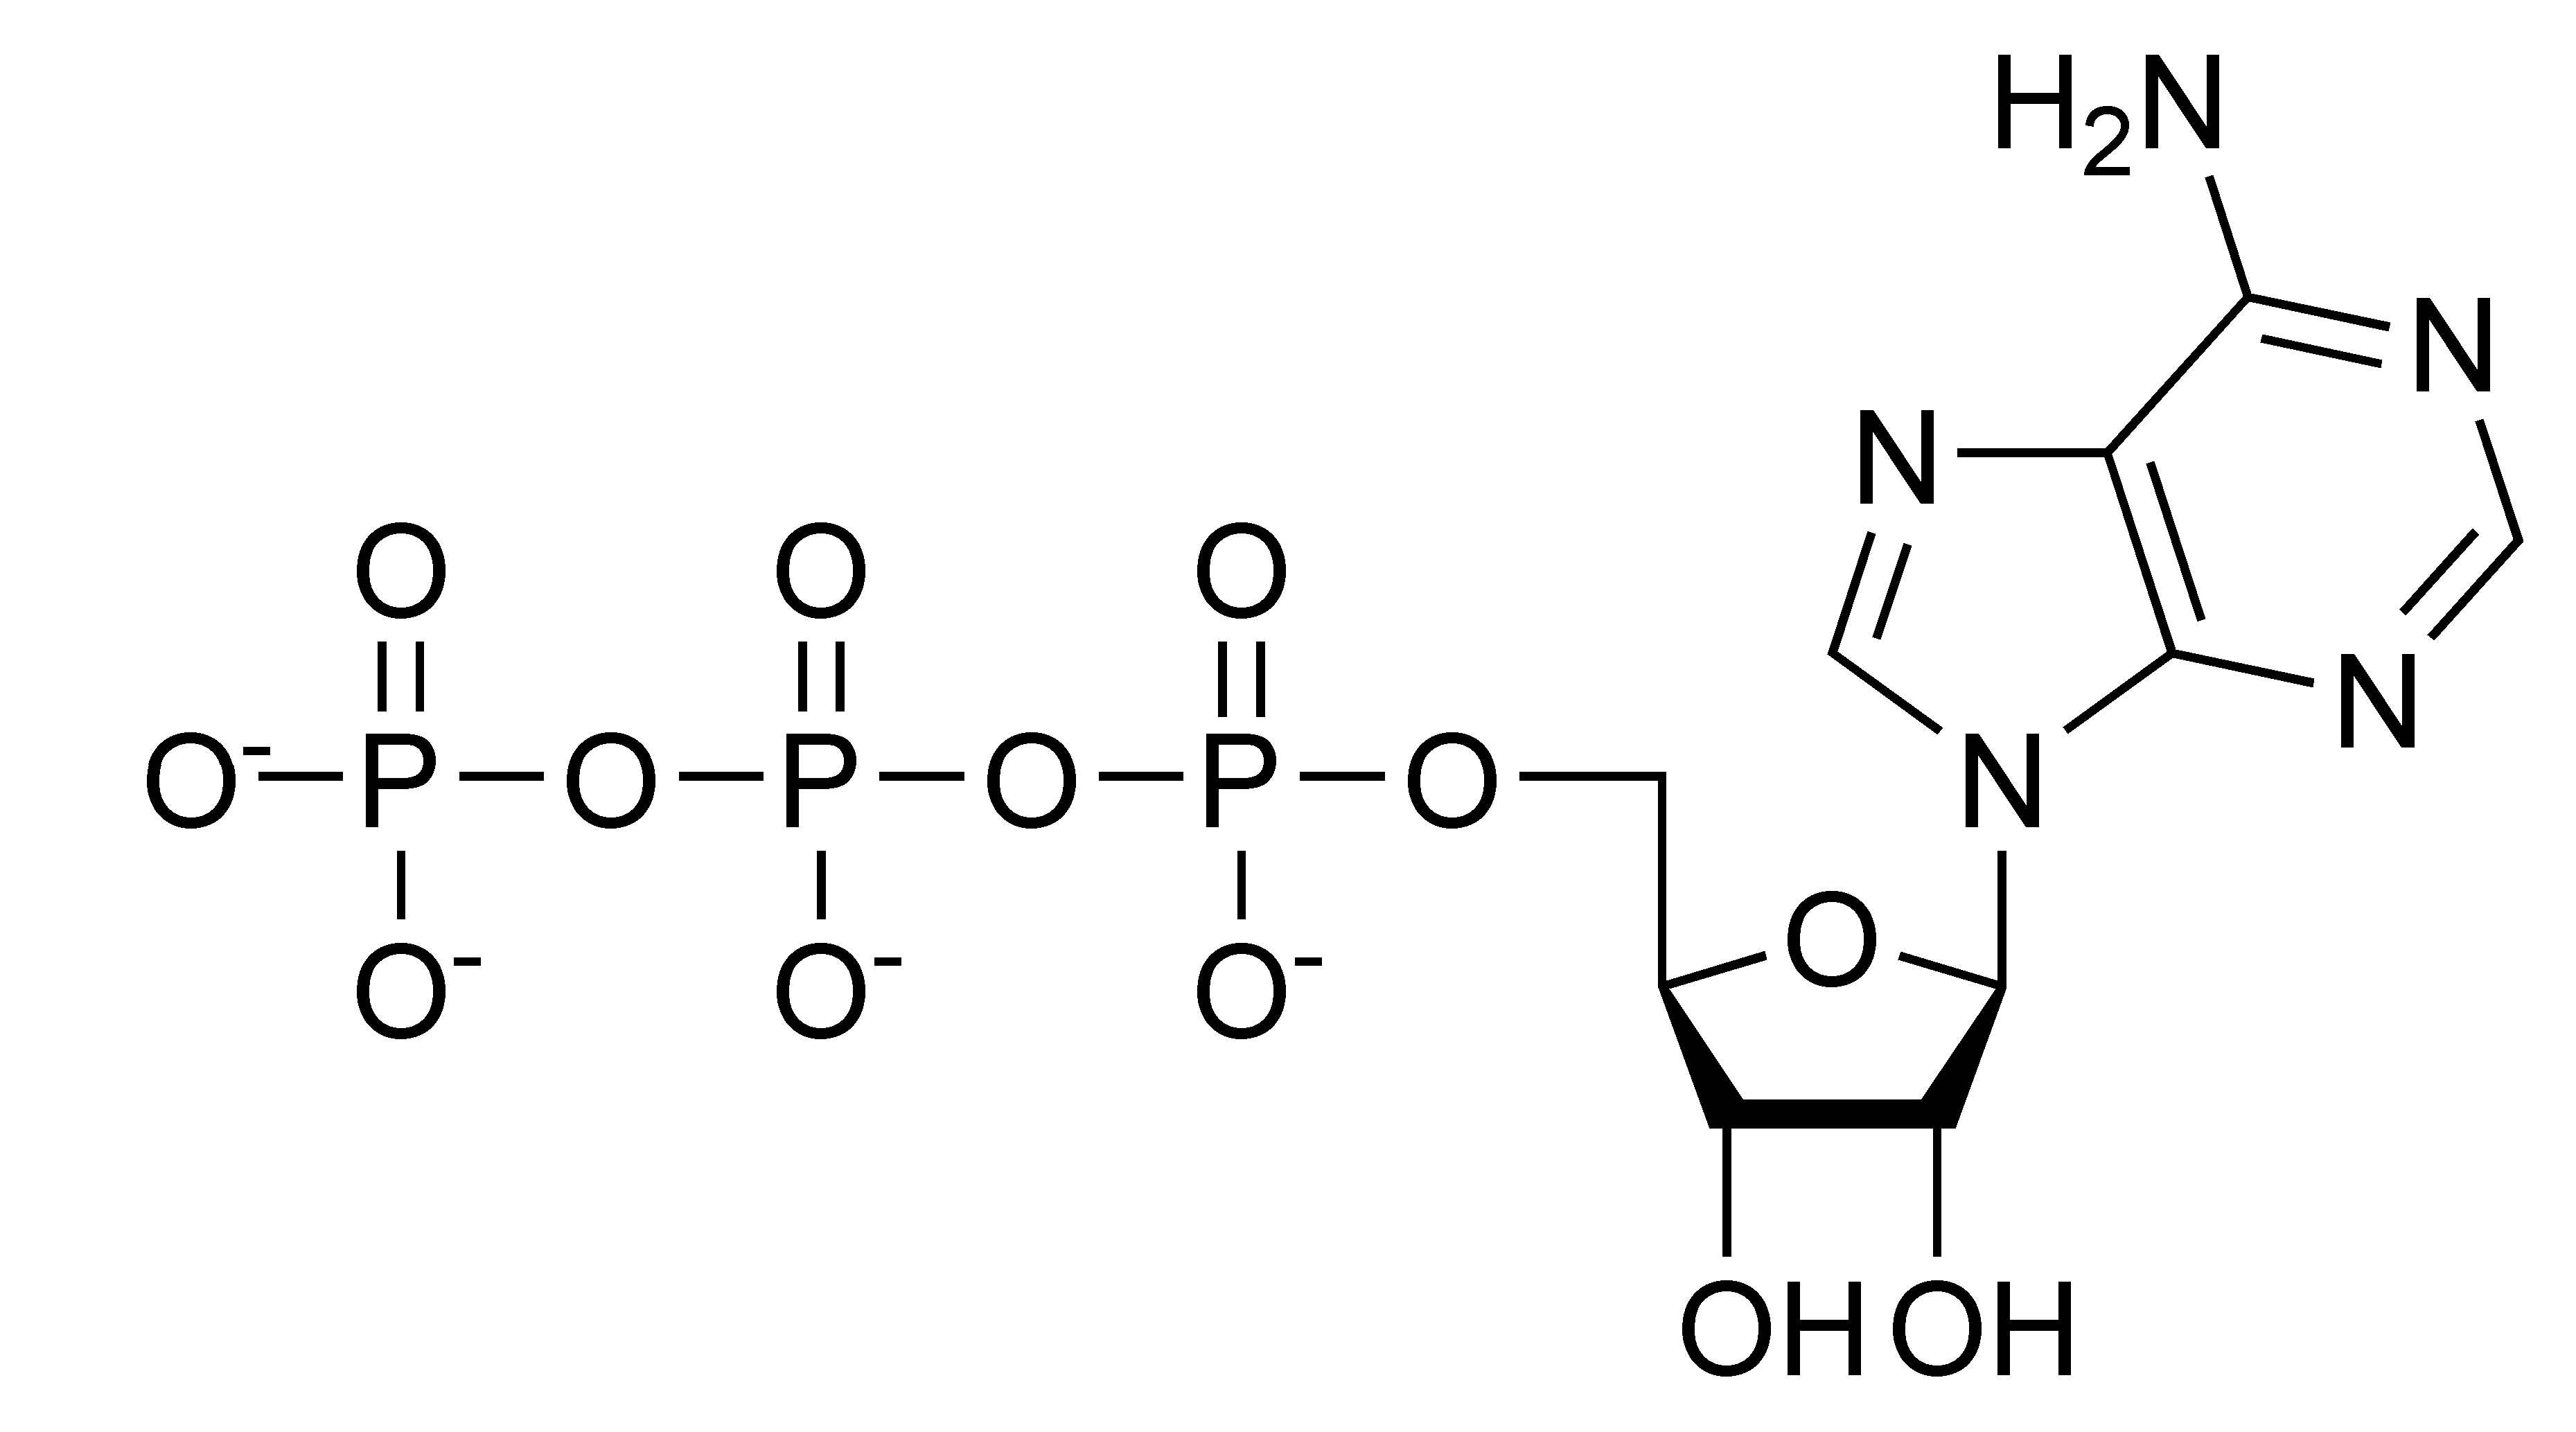 FileATP chemical structure.png Wikimedia Commons